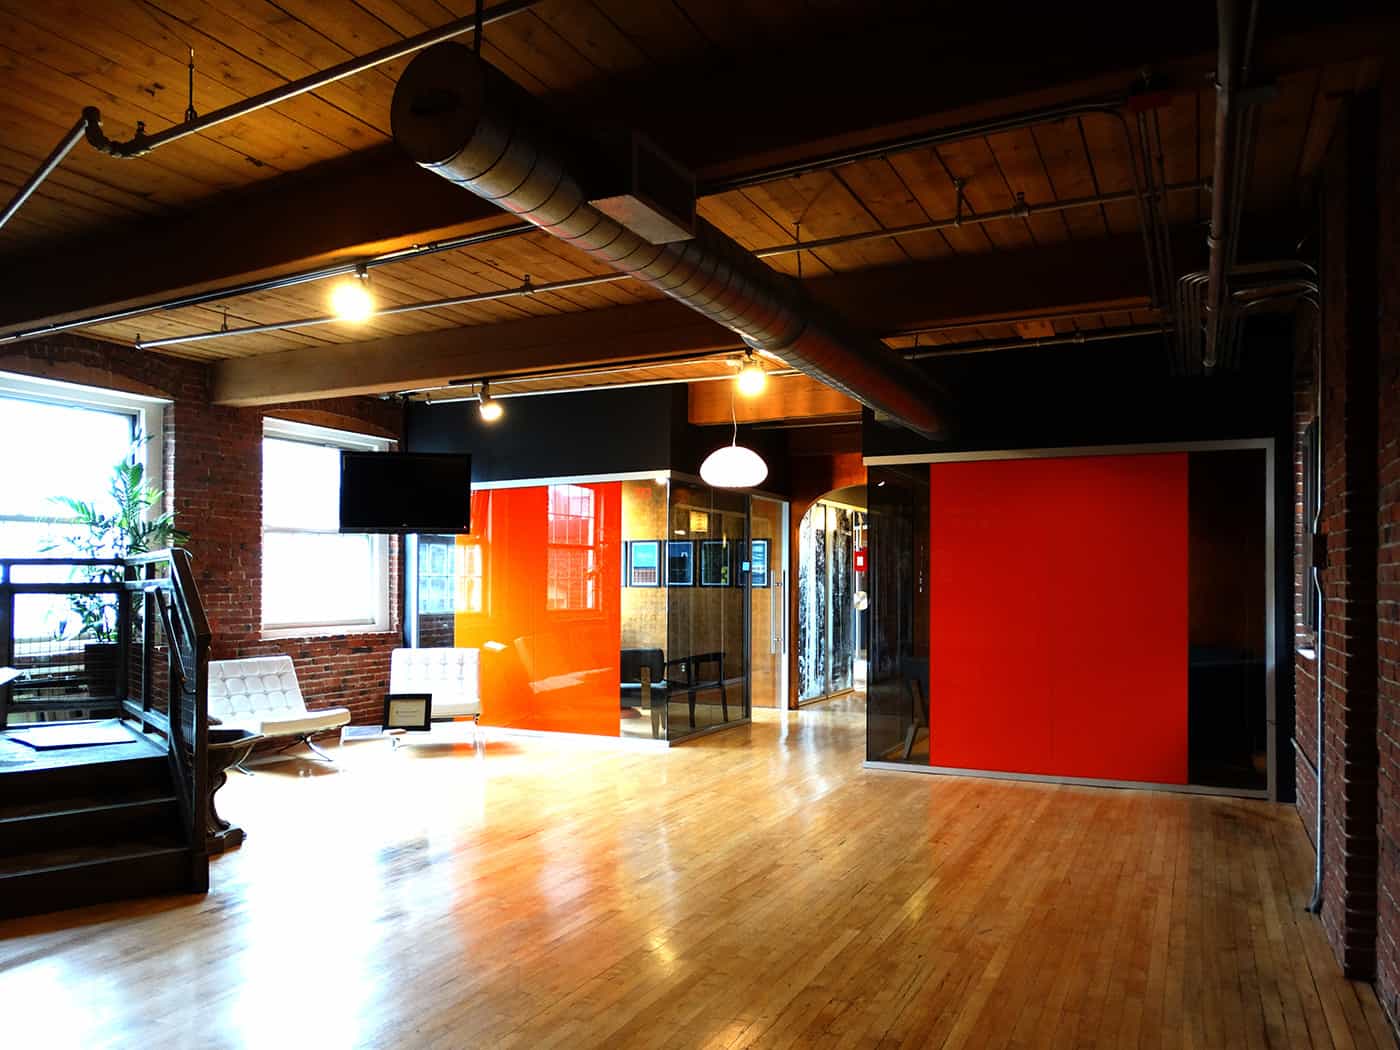 A large room with a wooden floor and glass walls with a red treatment.